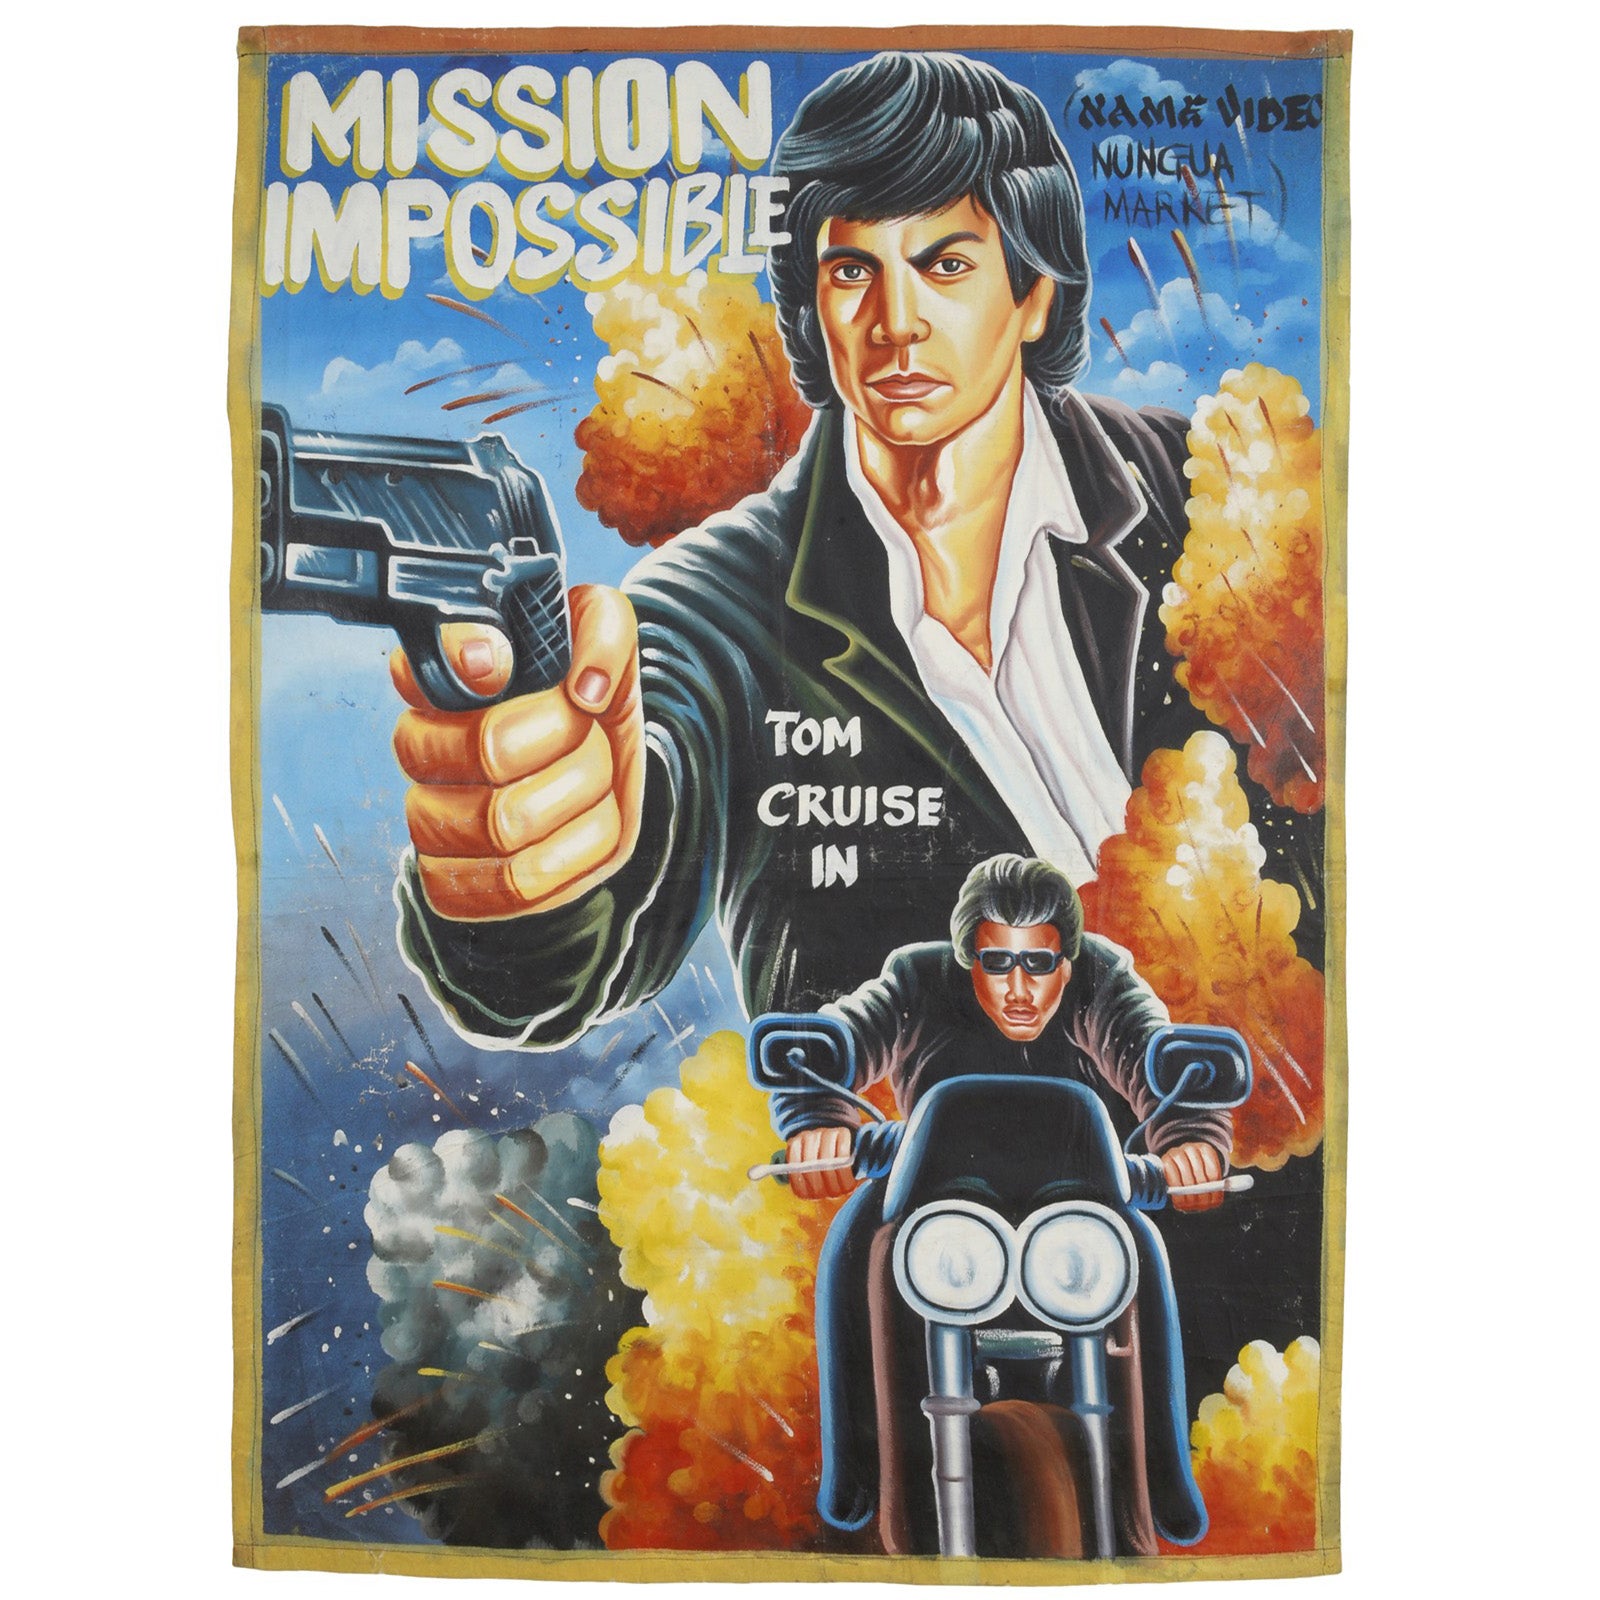 MISSION IMPOSSIBLE MOVIE POSTER HAND PAINTED IN GHANA FOR THE LOCAL CINEMA